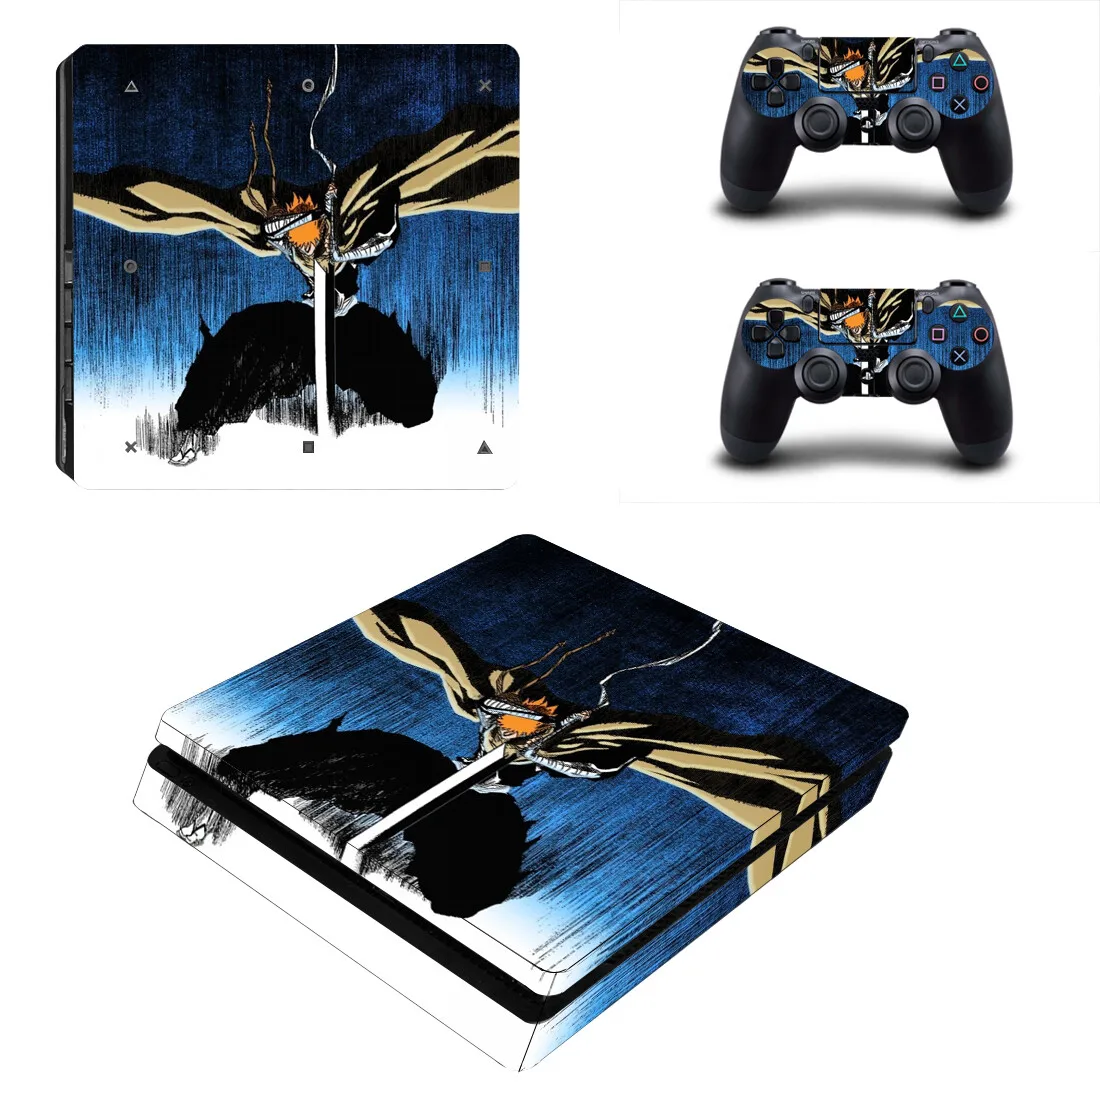 

Anime BLEACH PS4 Slim Skin Sticker For Sony PlayStation 4 Console and Controllers PS4 Slim Skins Sticker Decal Vinyl